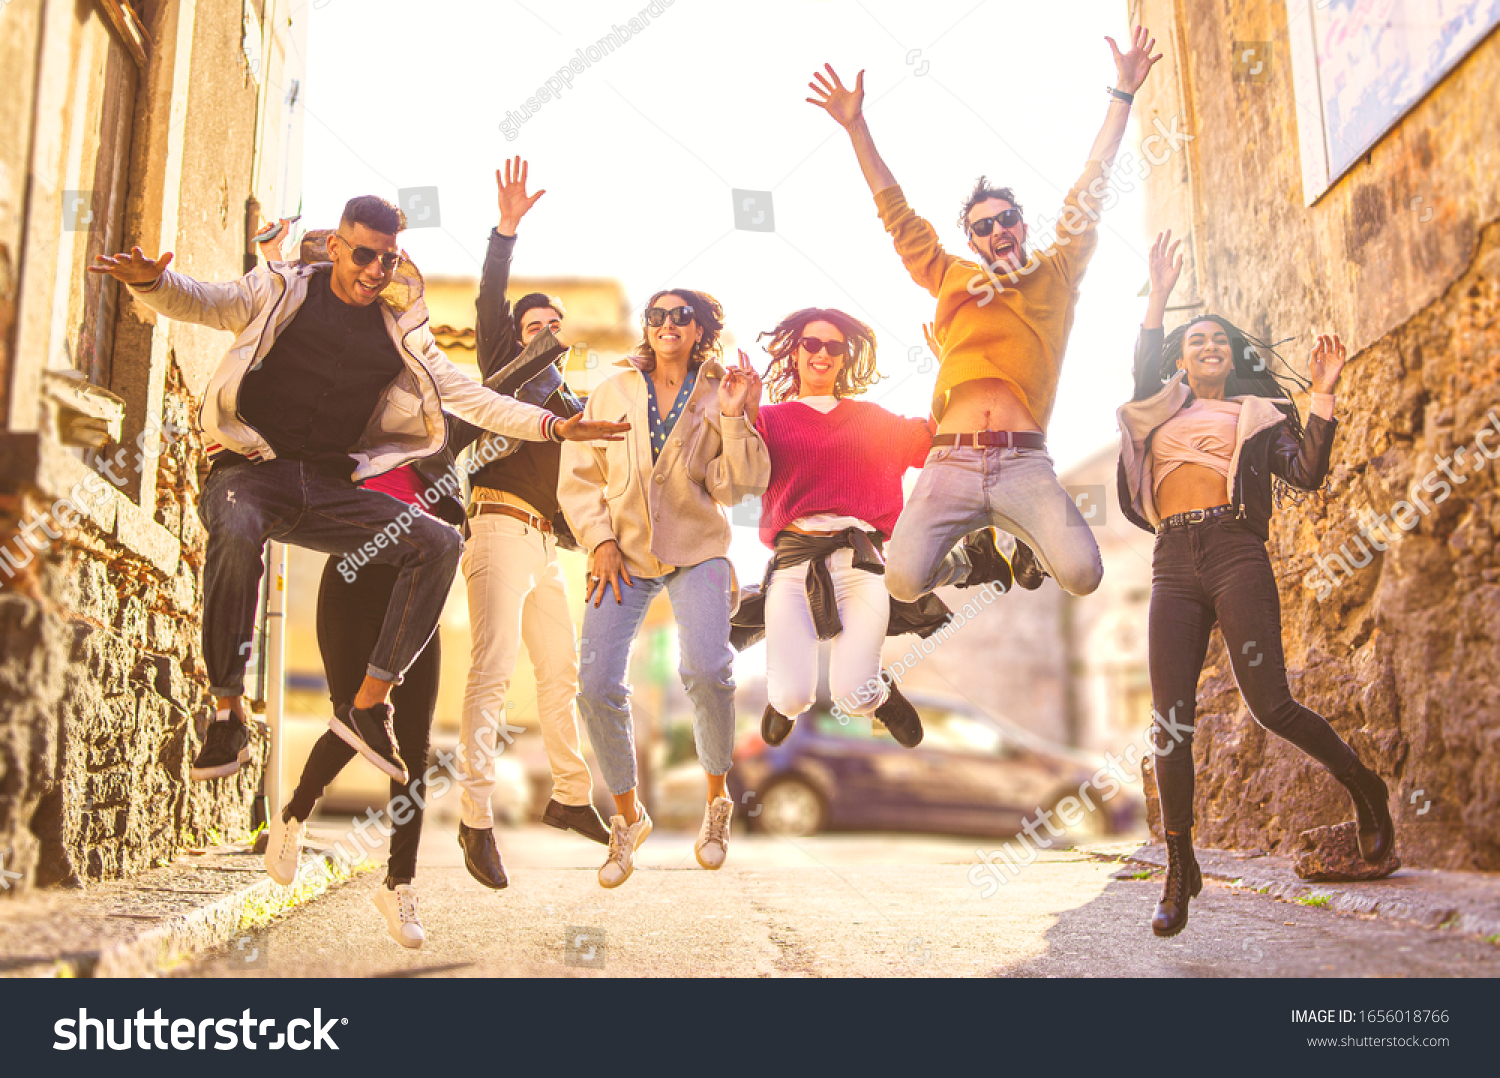 Multiethnic Group Young People Having Fun Stock Photo 1656018766